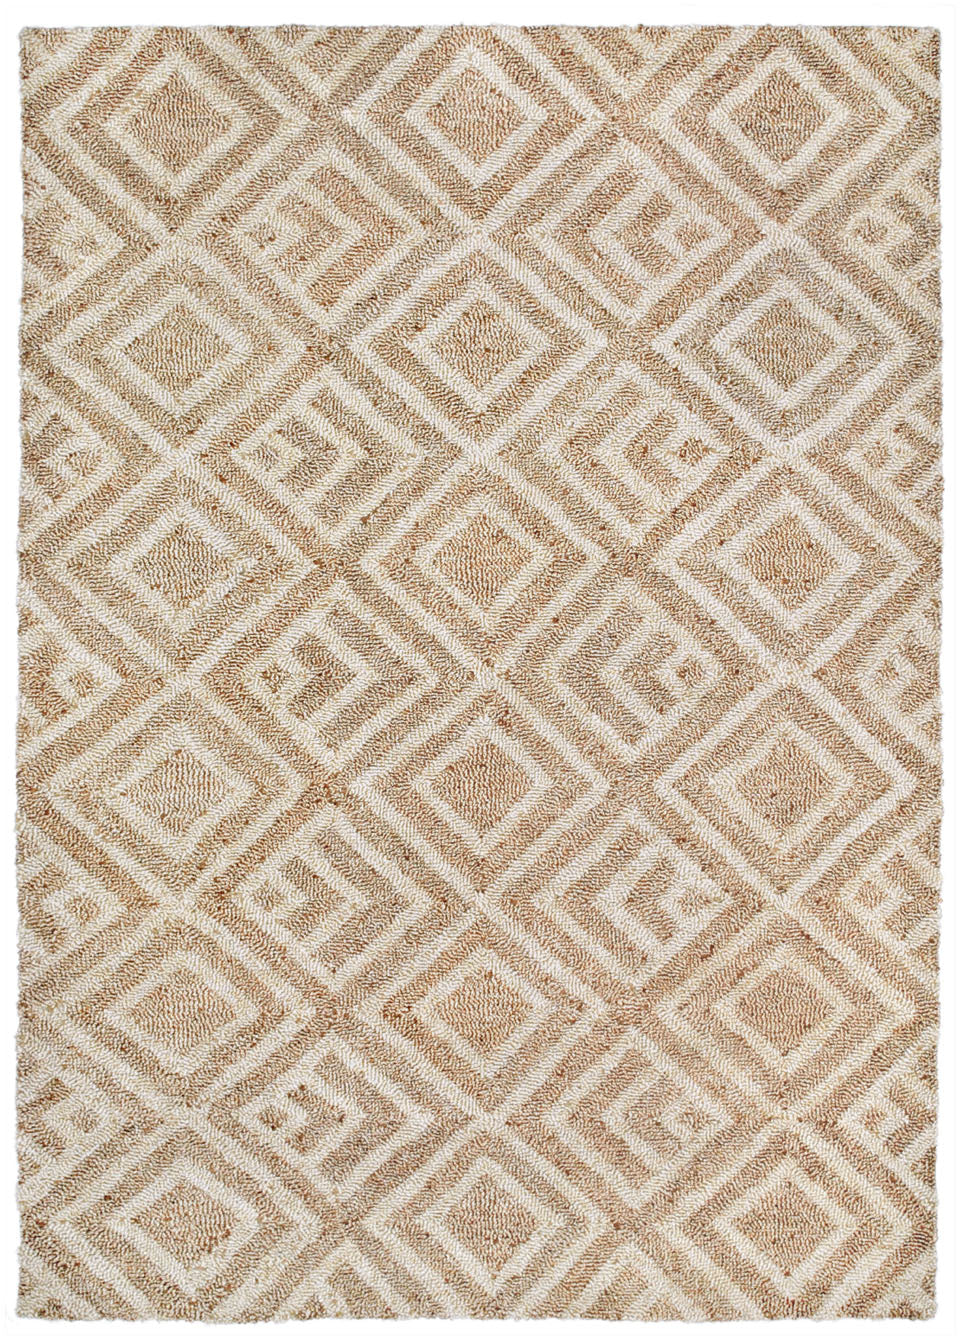 Trans Ocean Wooster Kuba Natural Area Rug Mirror by Liora Manne main image